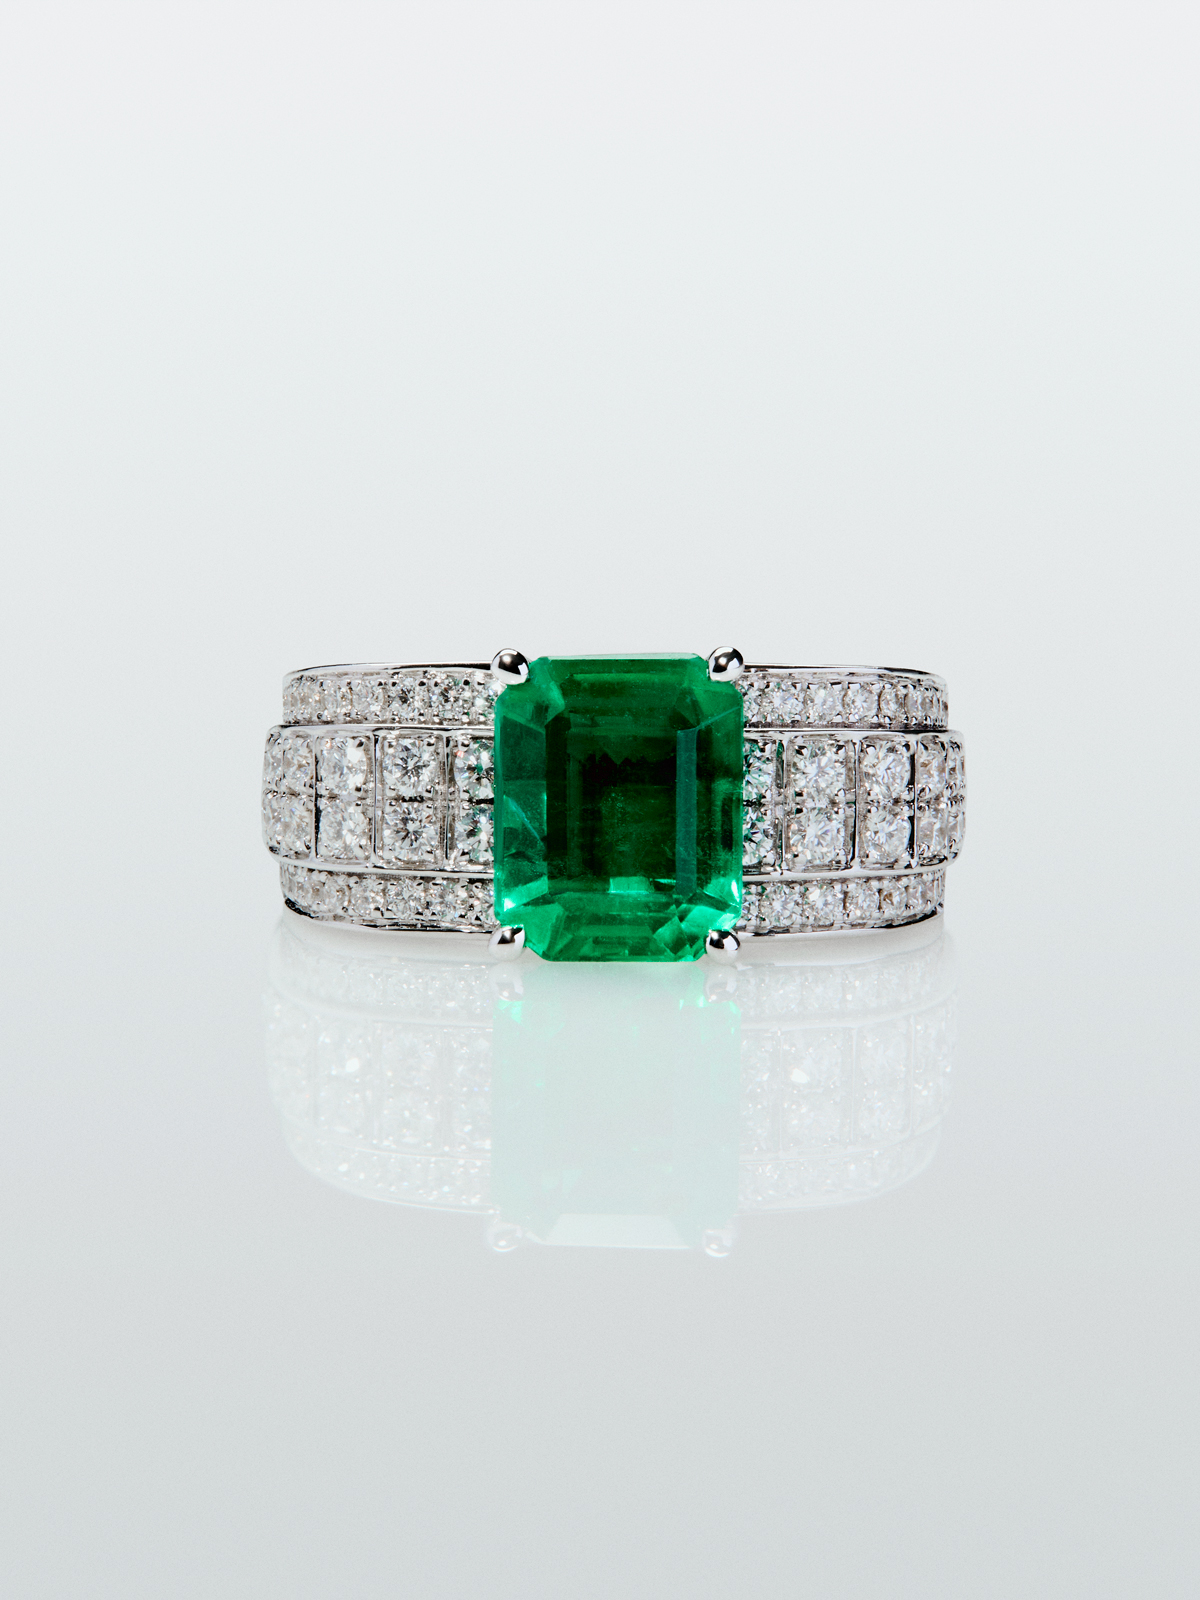 18K white gold ring with octagonal cut emerald of 2.73 cts and 124 brilliant cut diamonds with a total of 0.861 cts